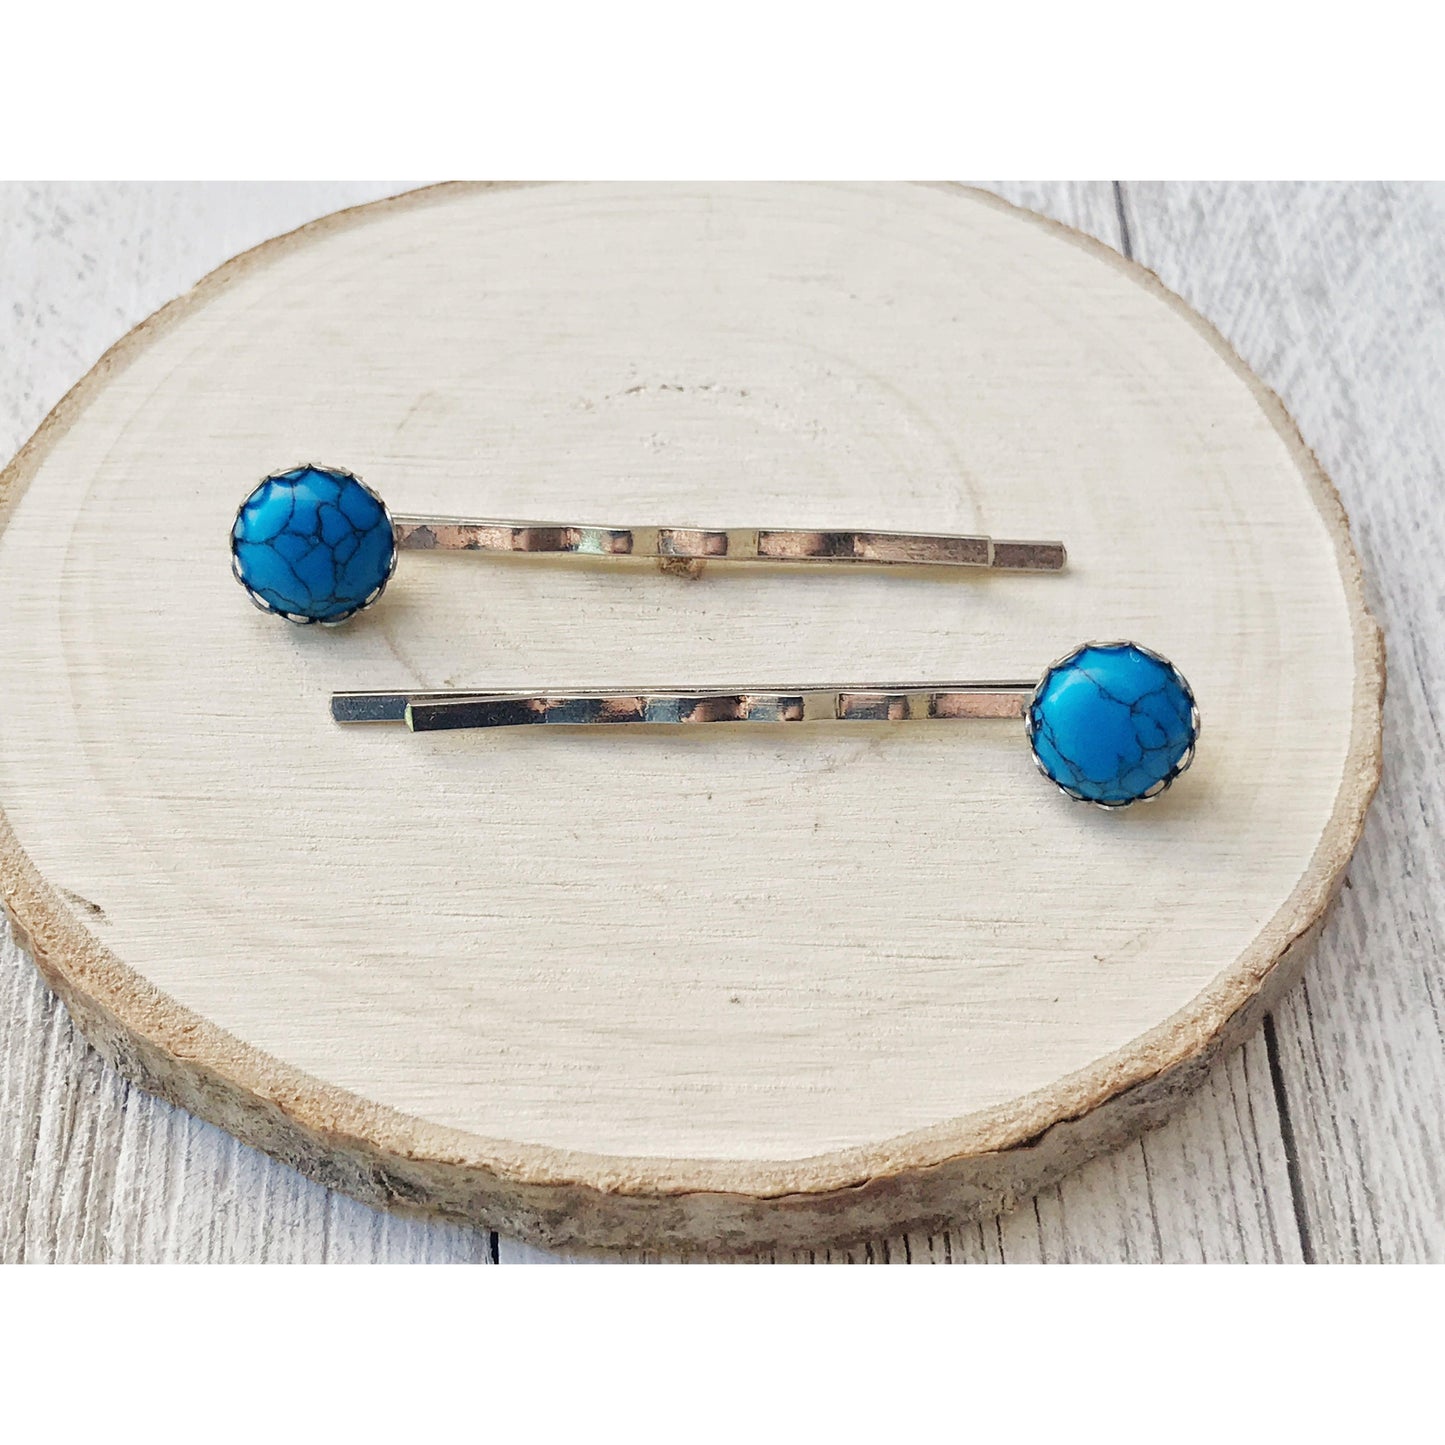 Turquoise Hair Pin - Western Cowgirl Decorative Bobby Pin, Women's Southwestern Hair Accessories